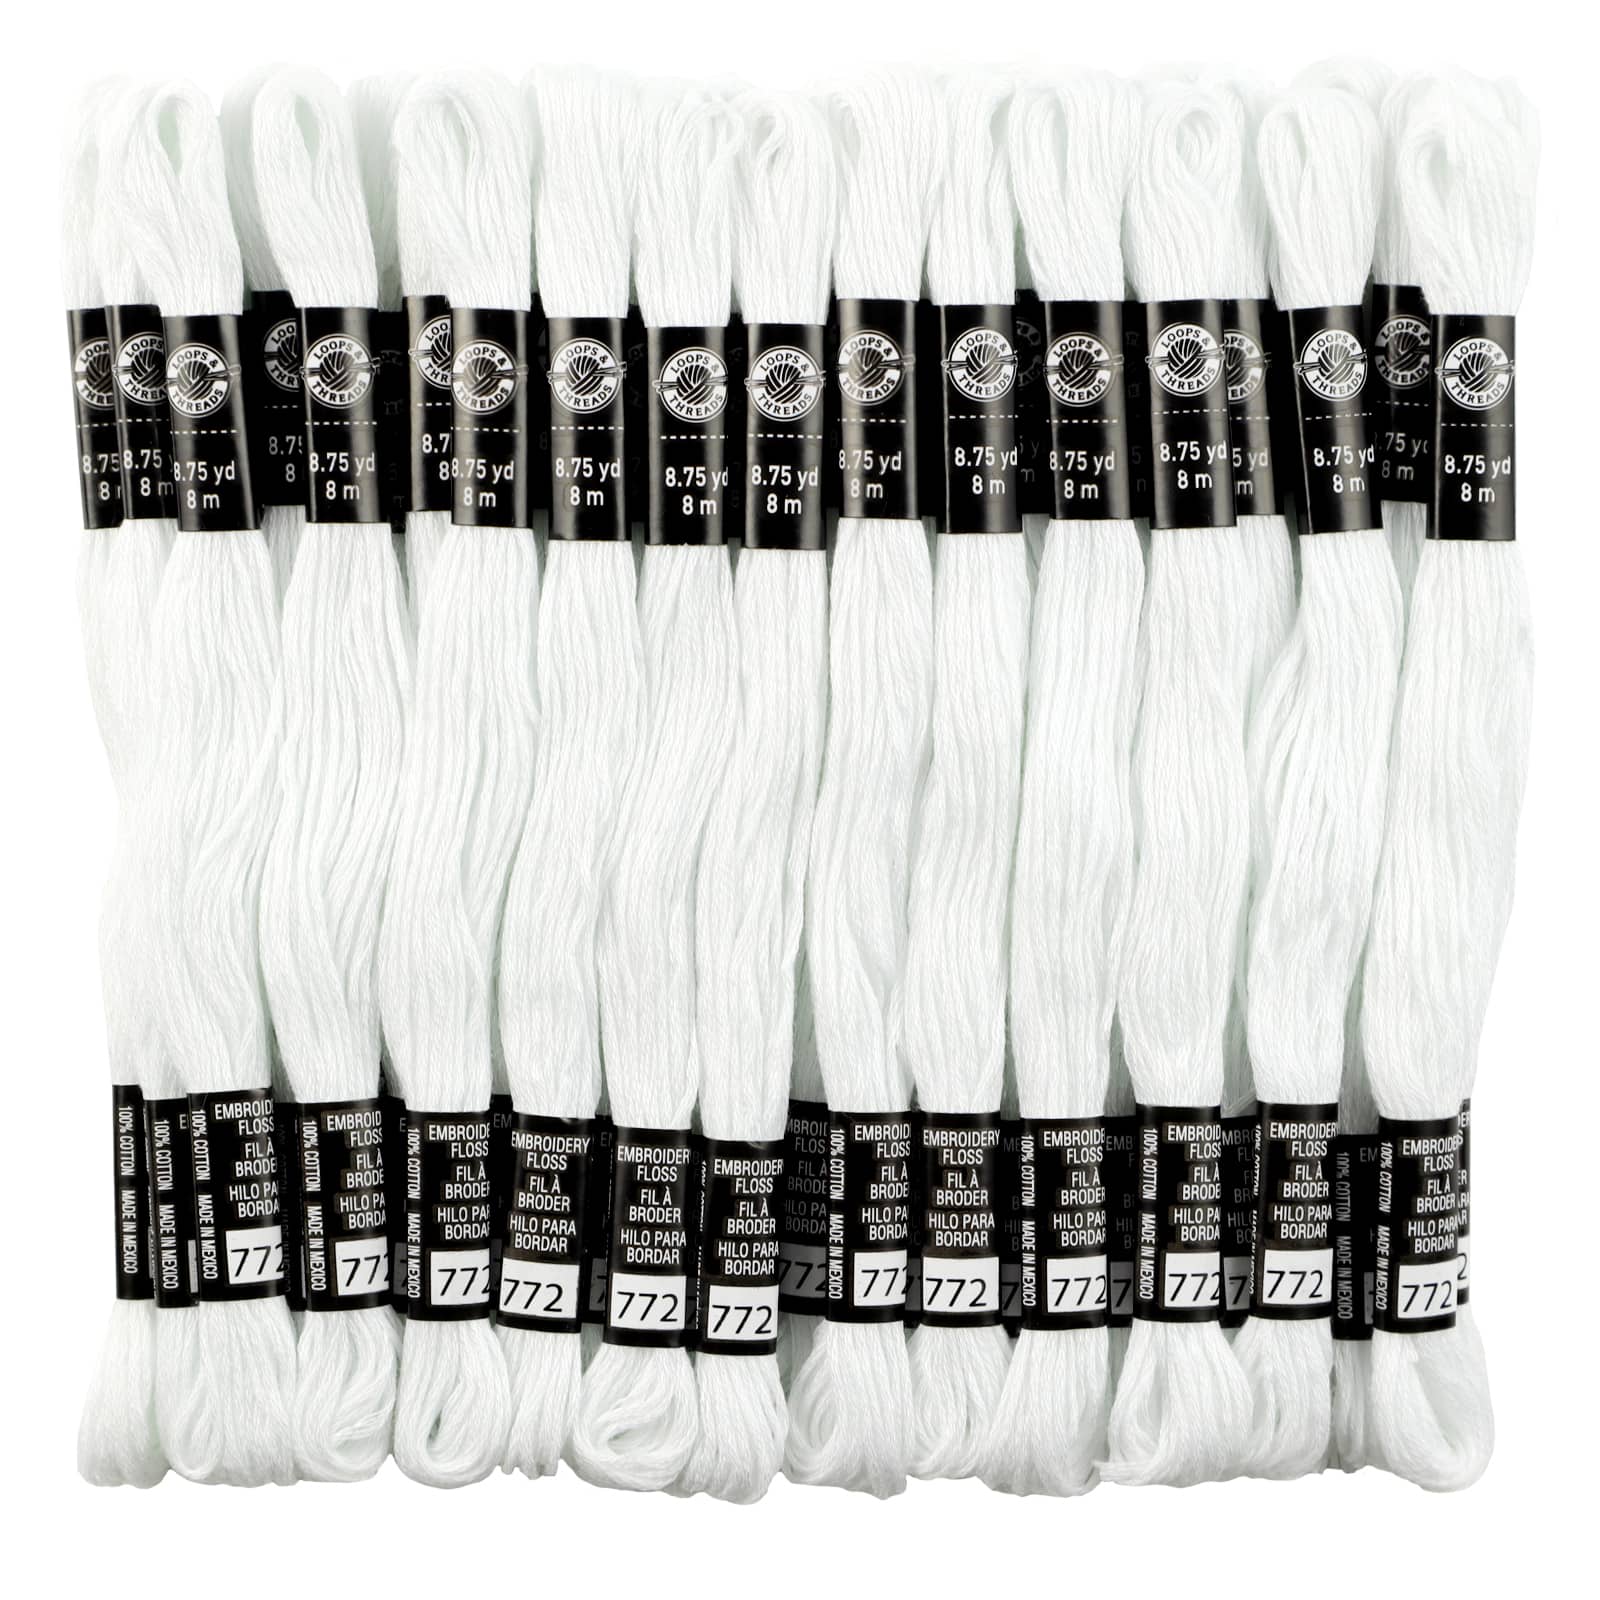 Loops & Threads White Embroidery Floss - 36 ct